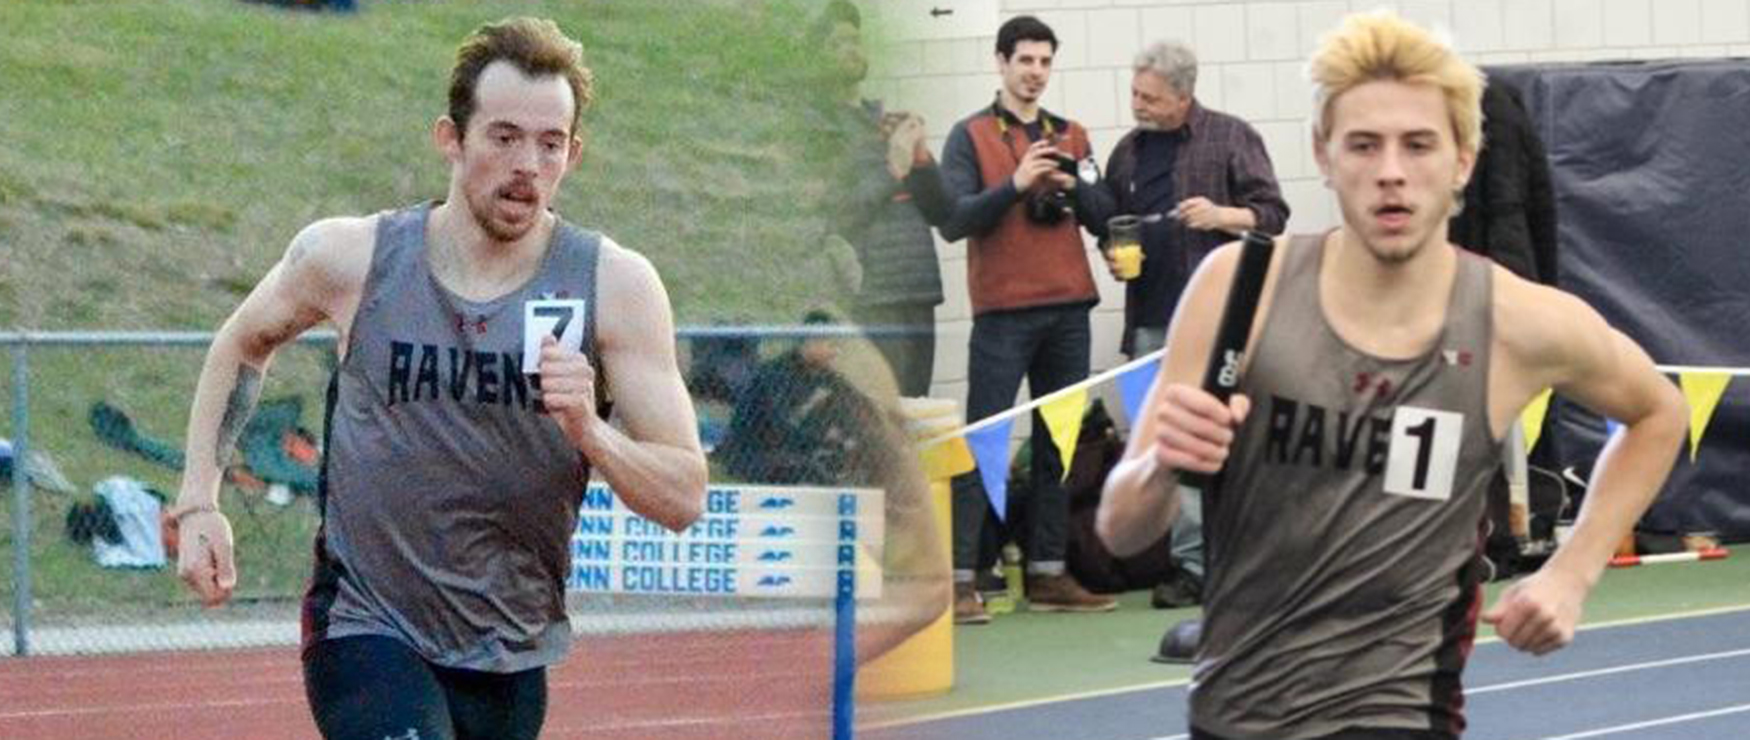 Men’s Cross Country/Track & Field’s Gradijan, Holmes Earn CoSIDA Academic All-District Honors